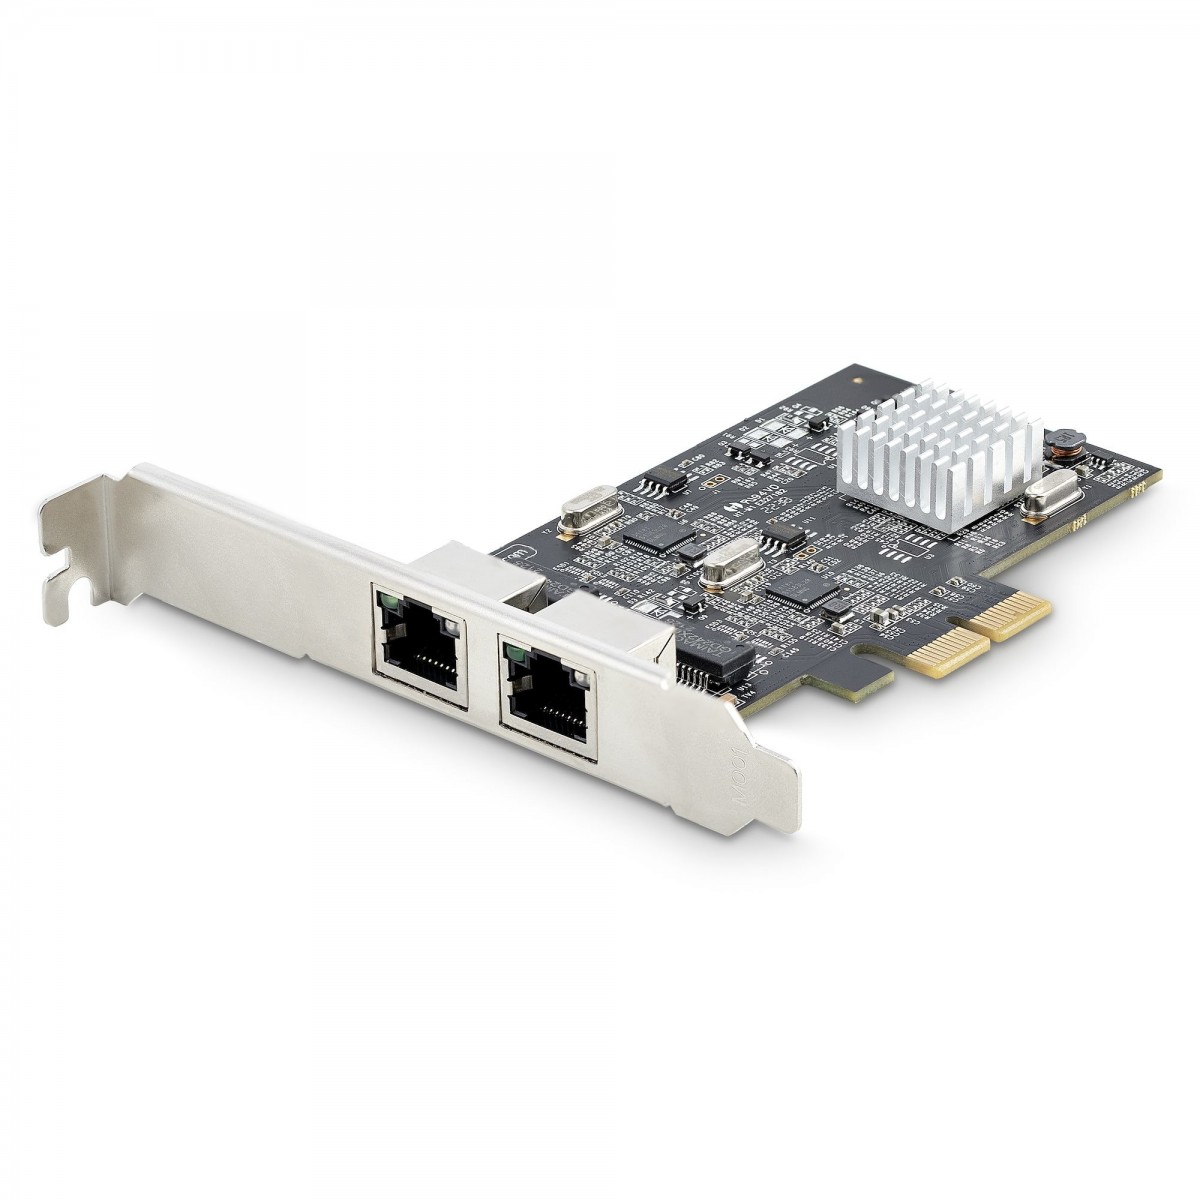 StarTech.com 2-Port NBASE-T 2.5Gbps PCIe Network Card - Network Card - PCI-Express